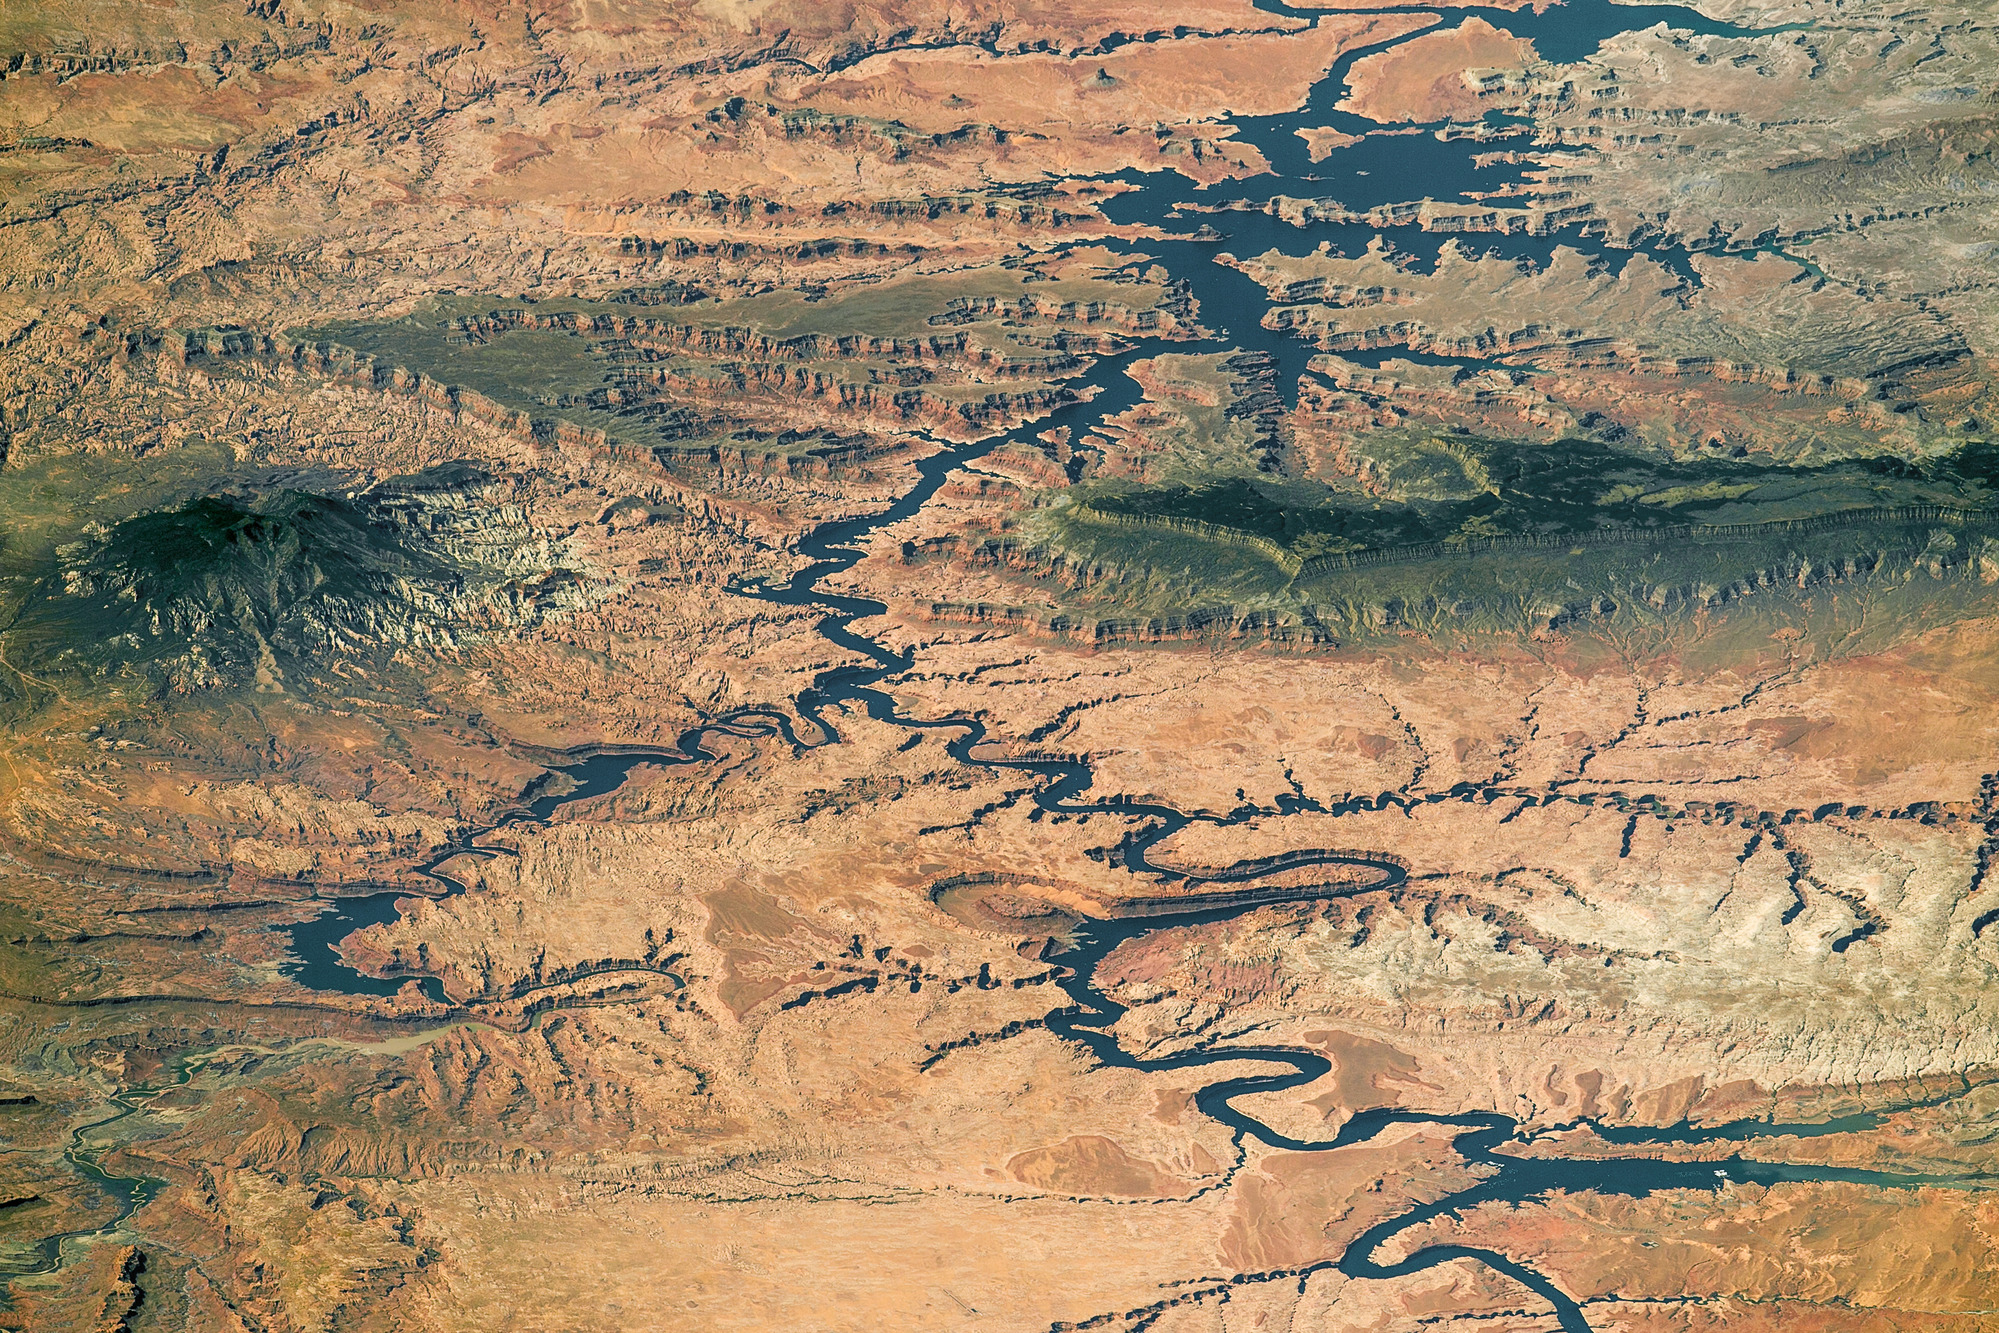 Lake and rivers snaking through a dry canyon- and plateau-dominated landscape appear almost abstract